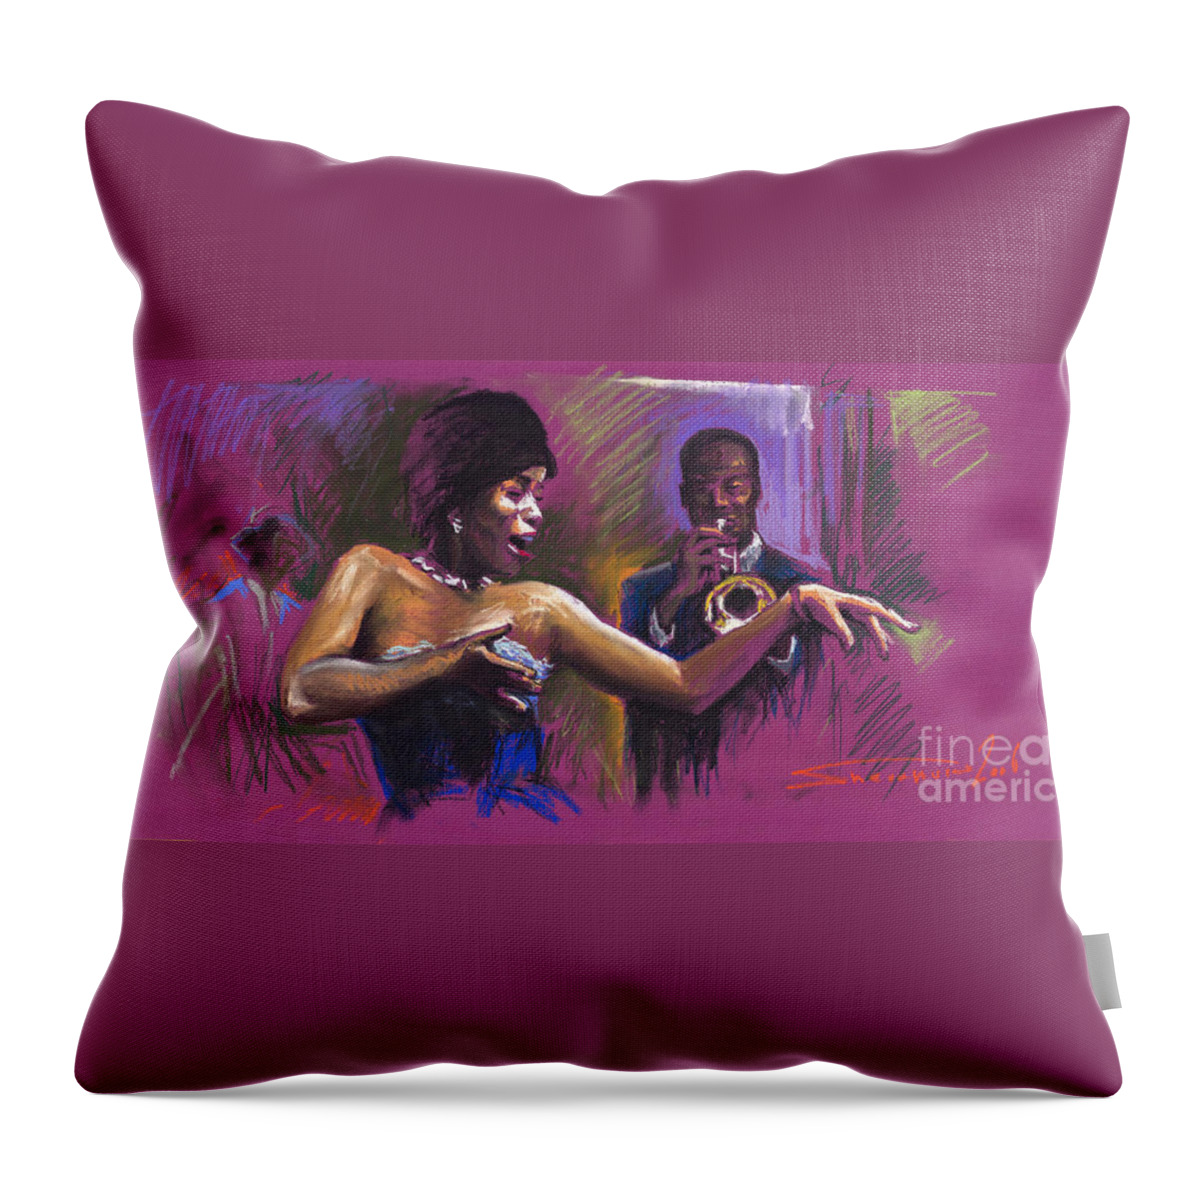 Jazz Throw Pillow featuring the painting Jazz Song.2. by Yuriy Shevchuk